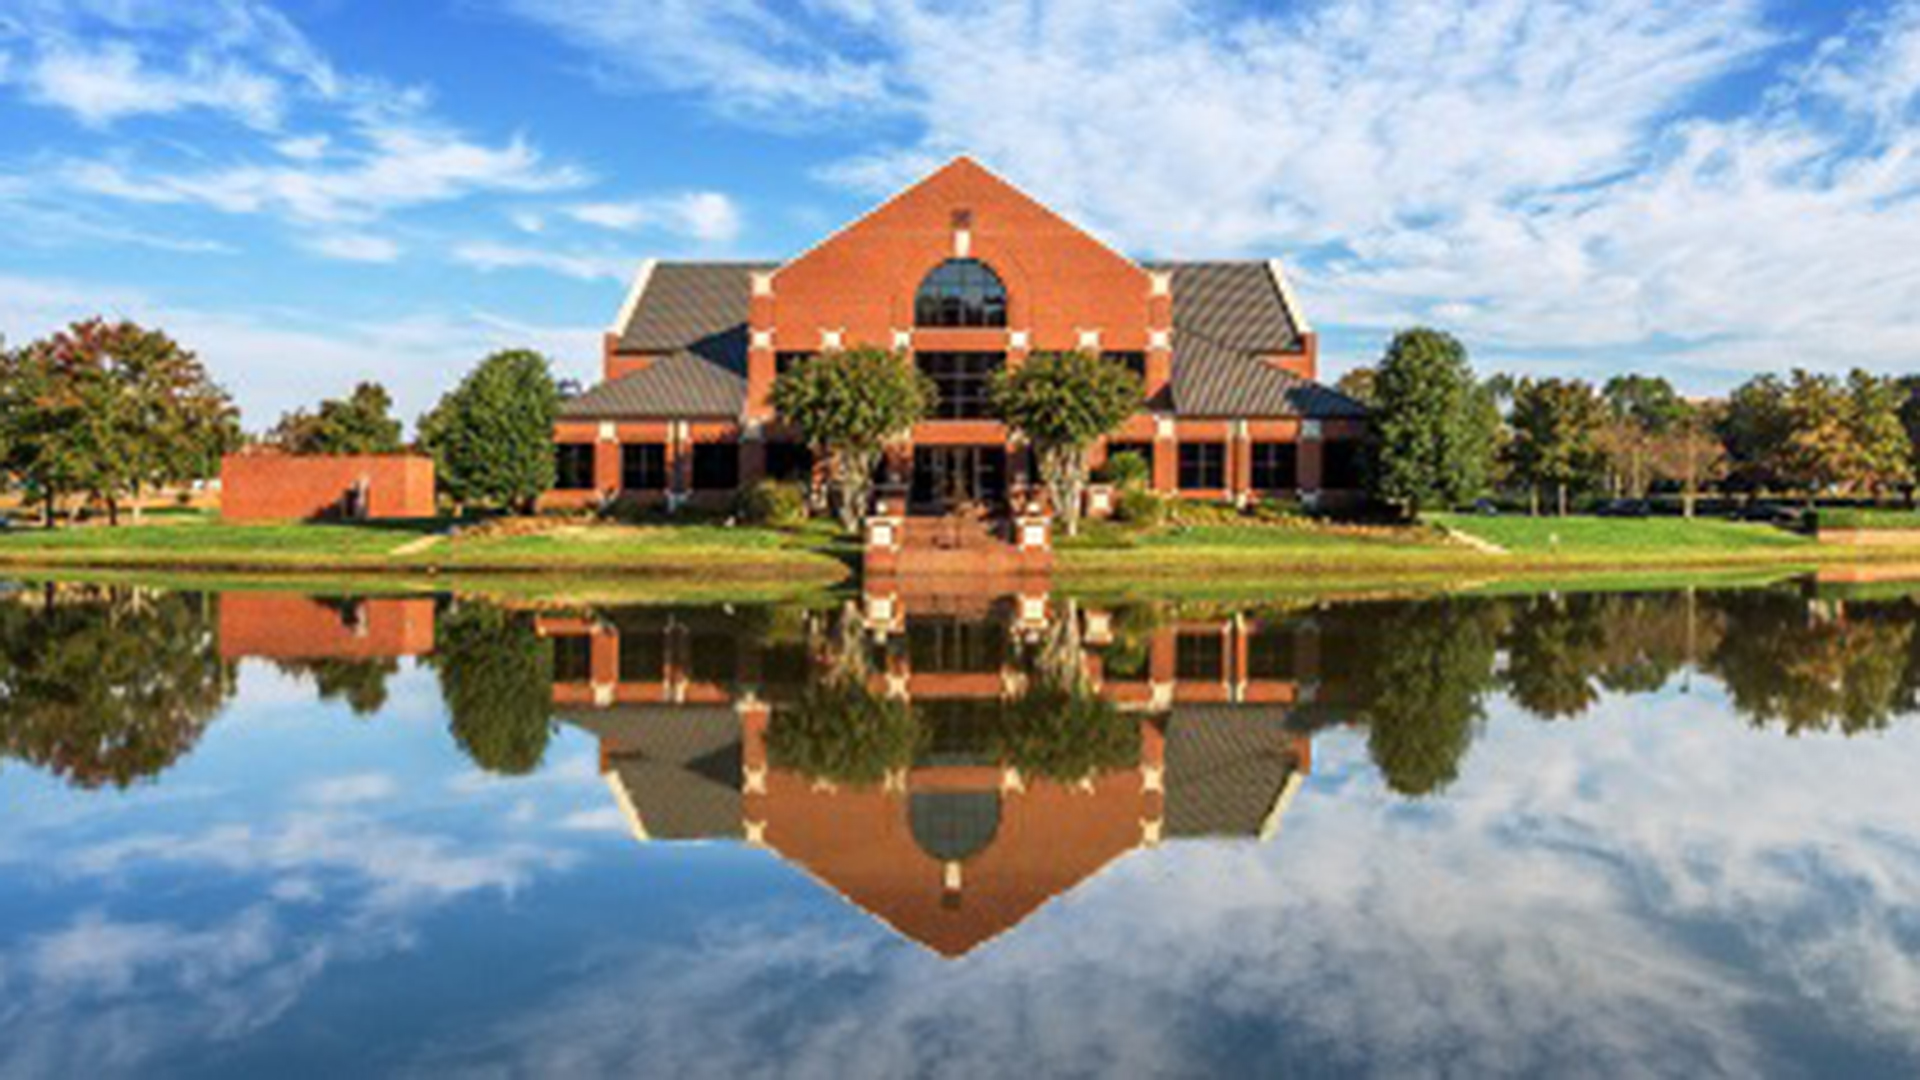 Exterior building photo with building reflection on the water of the neighboring pond